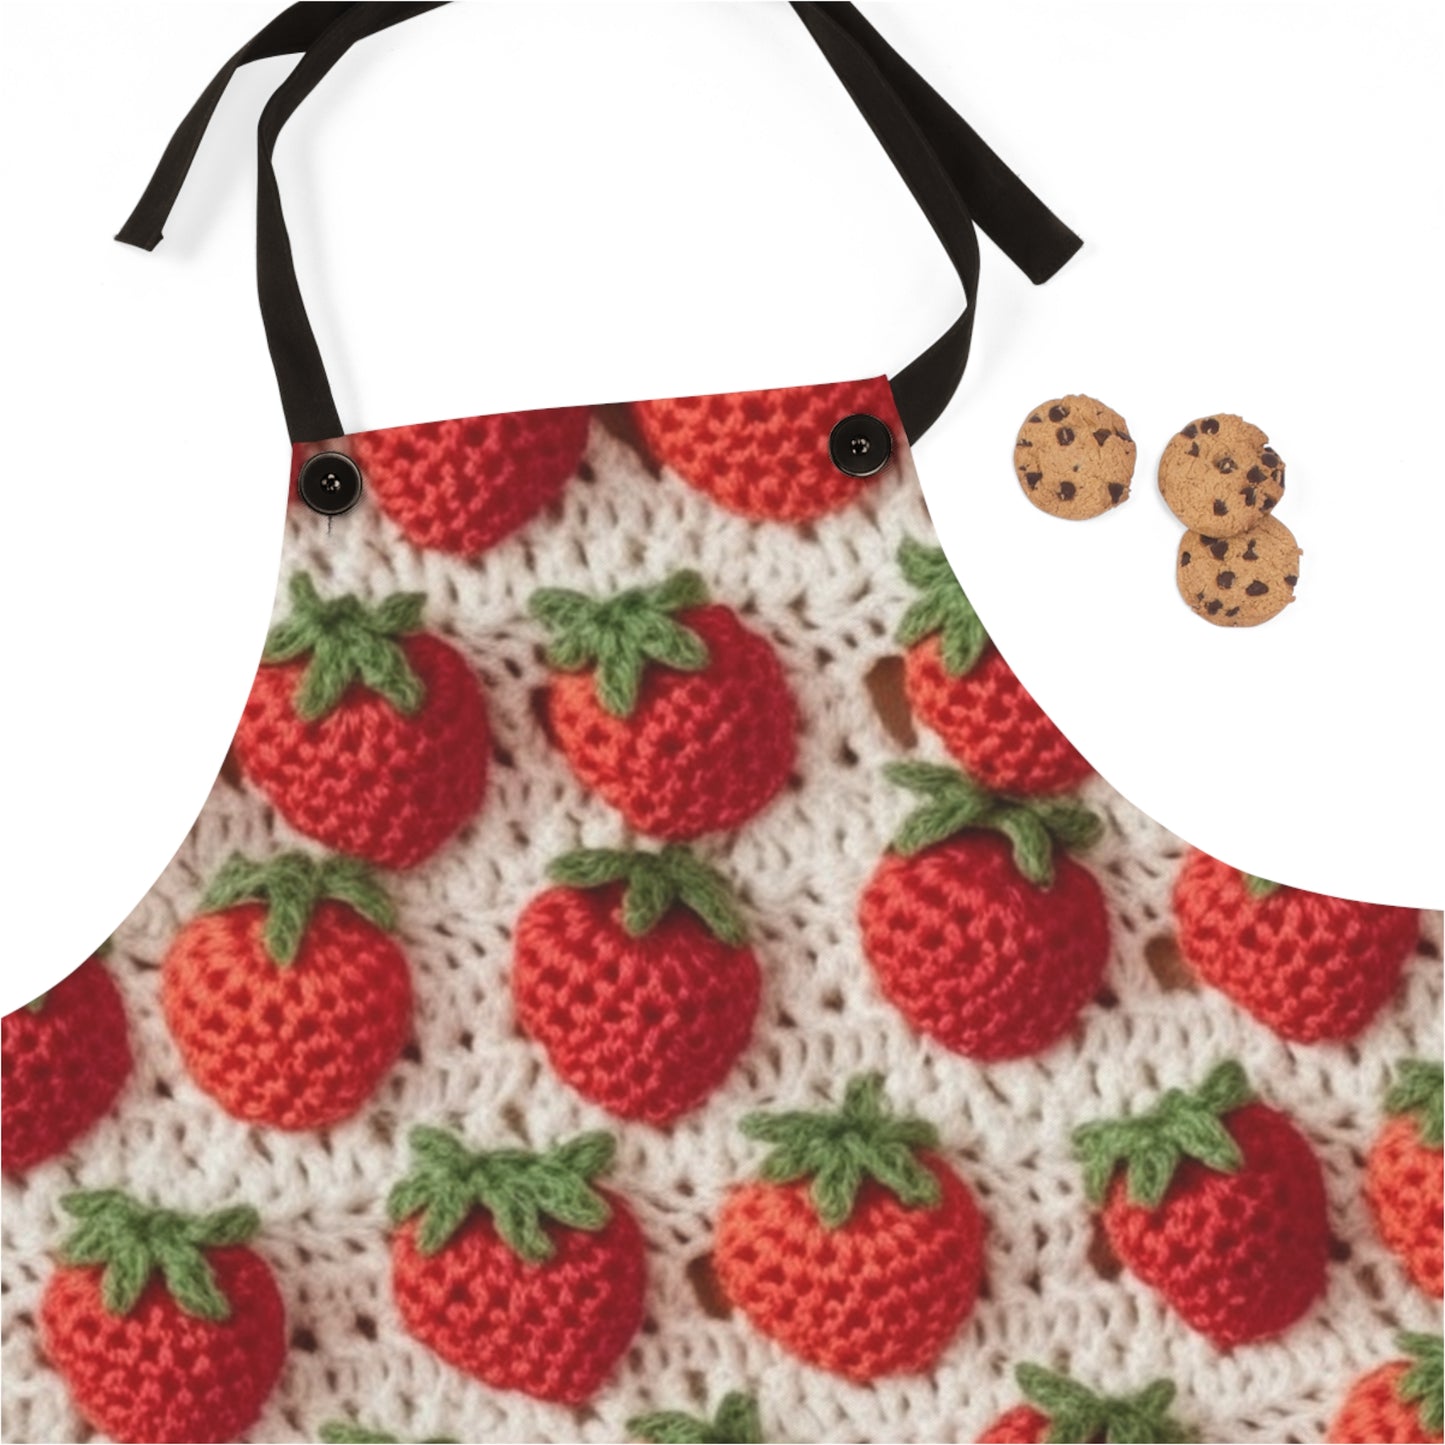 Strawberry Traditional Japanese, Crochet Craft, Fruit Design, Red Berry Pattern - Apron (AOP)